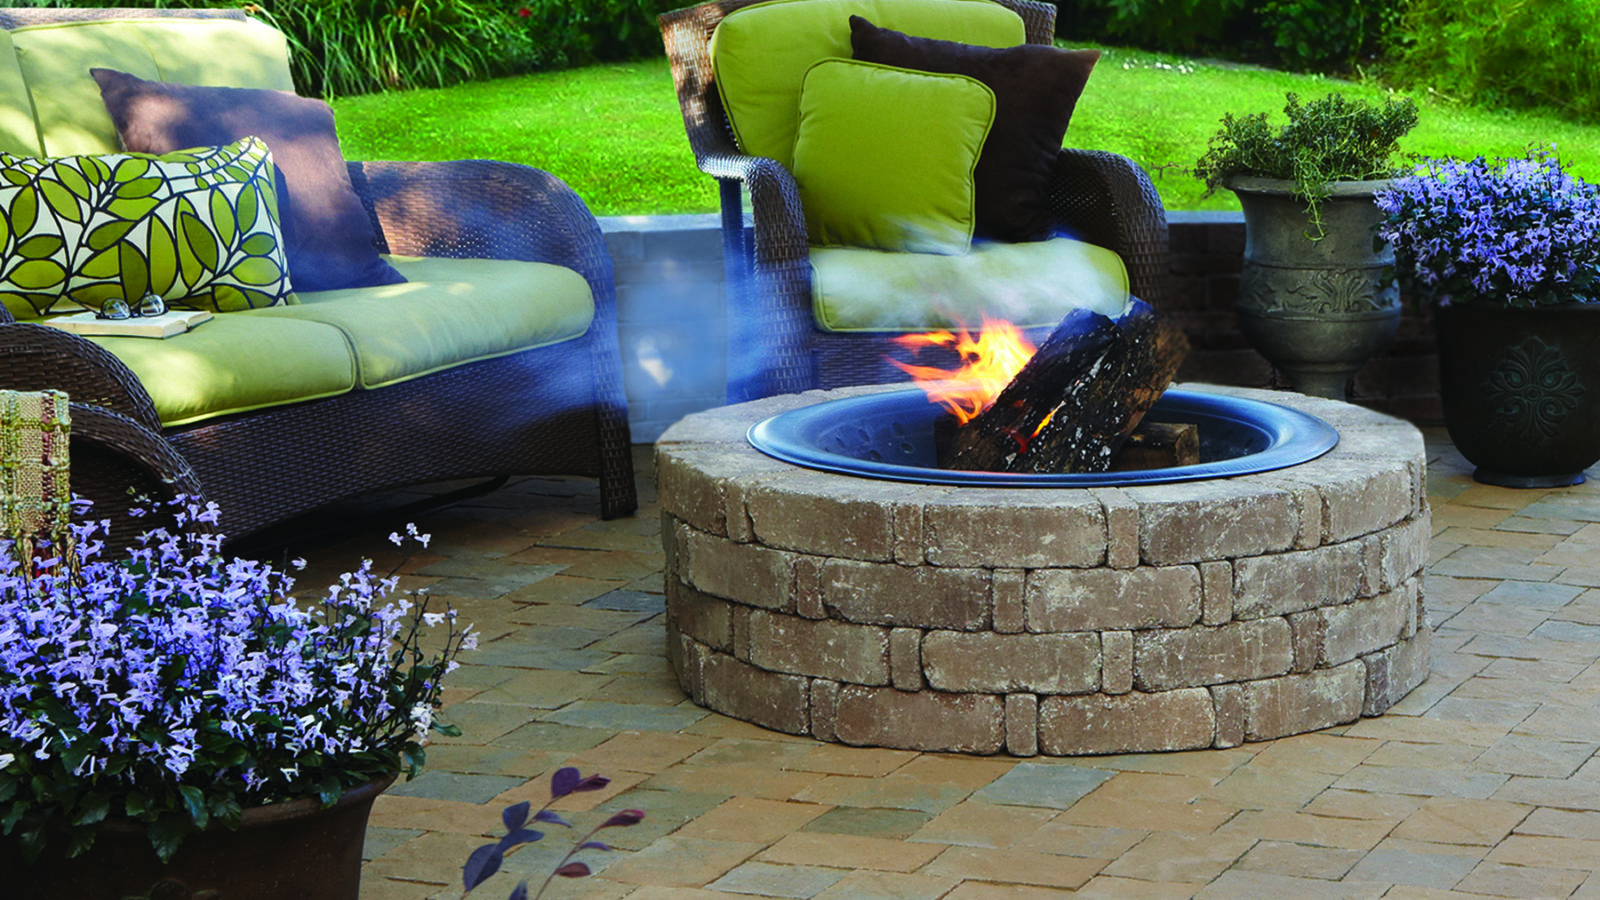 Brick fire pit in a paver patio